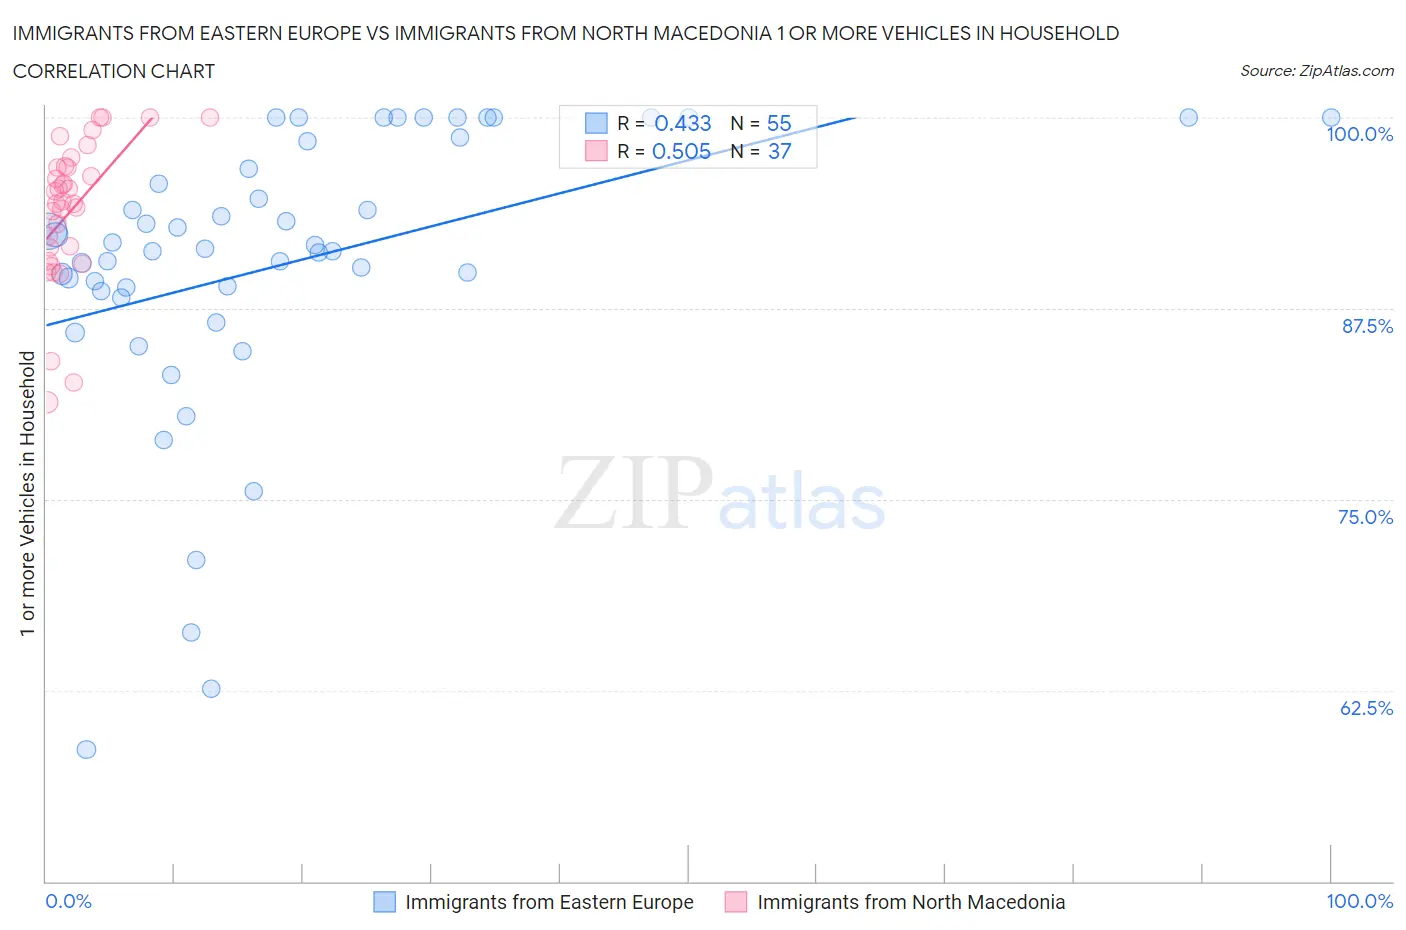 Immigrants from Eastern Europe vs Immigrants from North Macedonia 1 or more Vehicles in Household